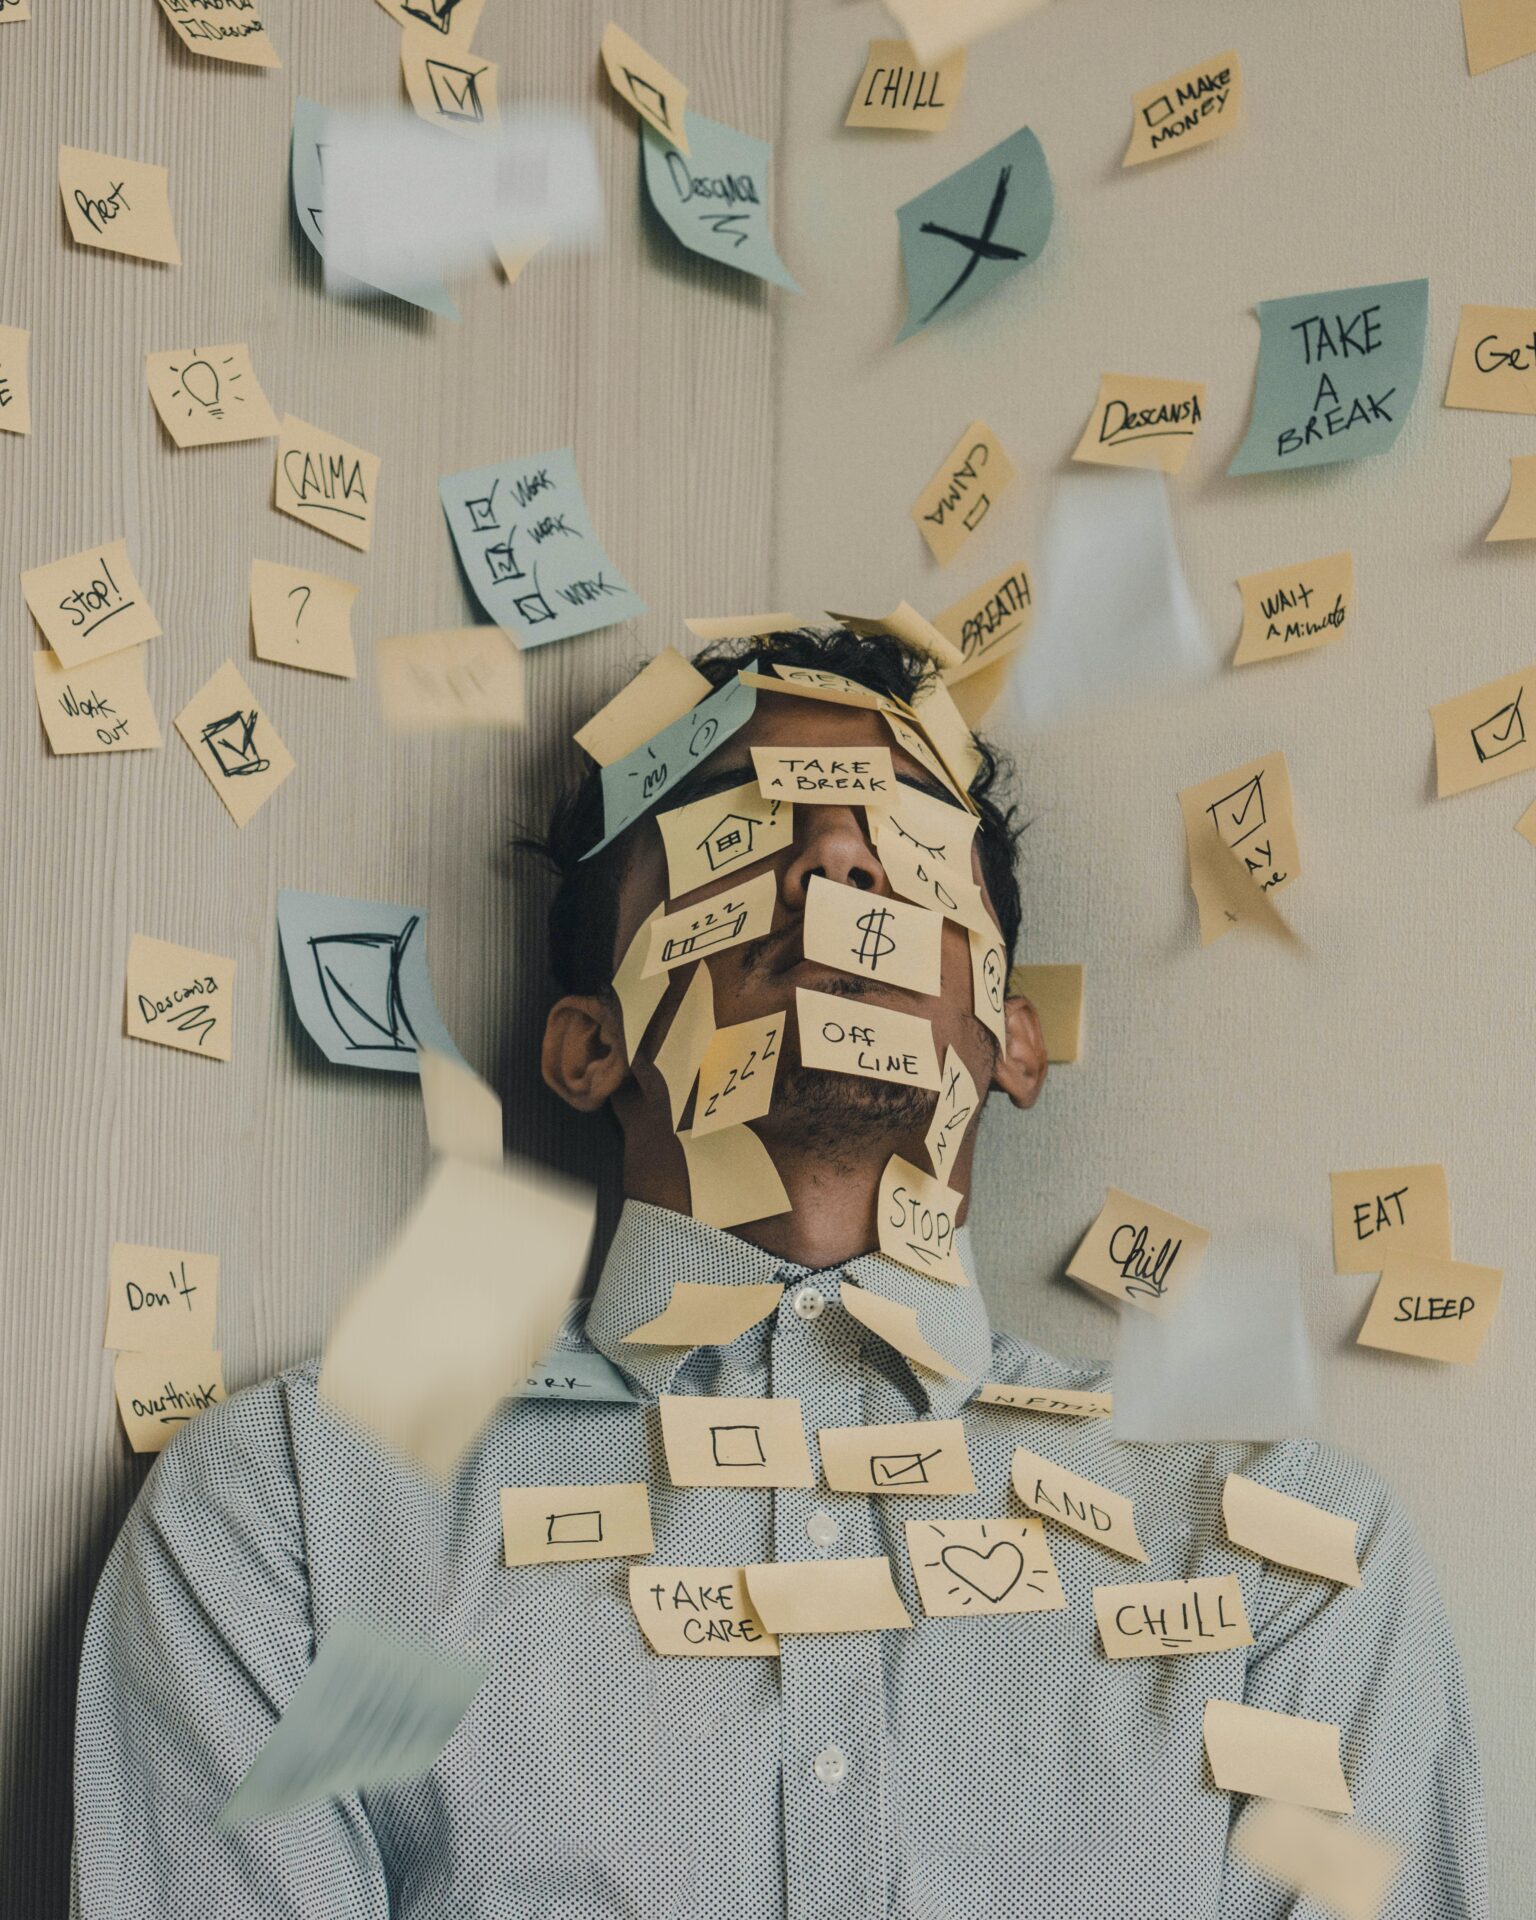 Man with face and chest covered in sticky notes (Photo by Luis Villasmil on Unsplash)